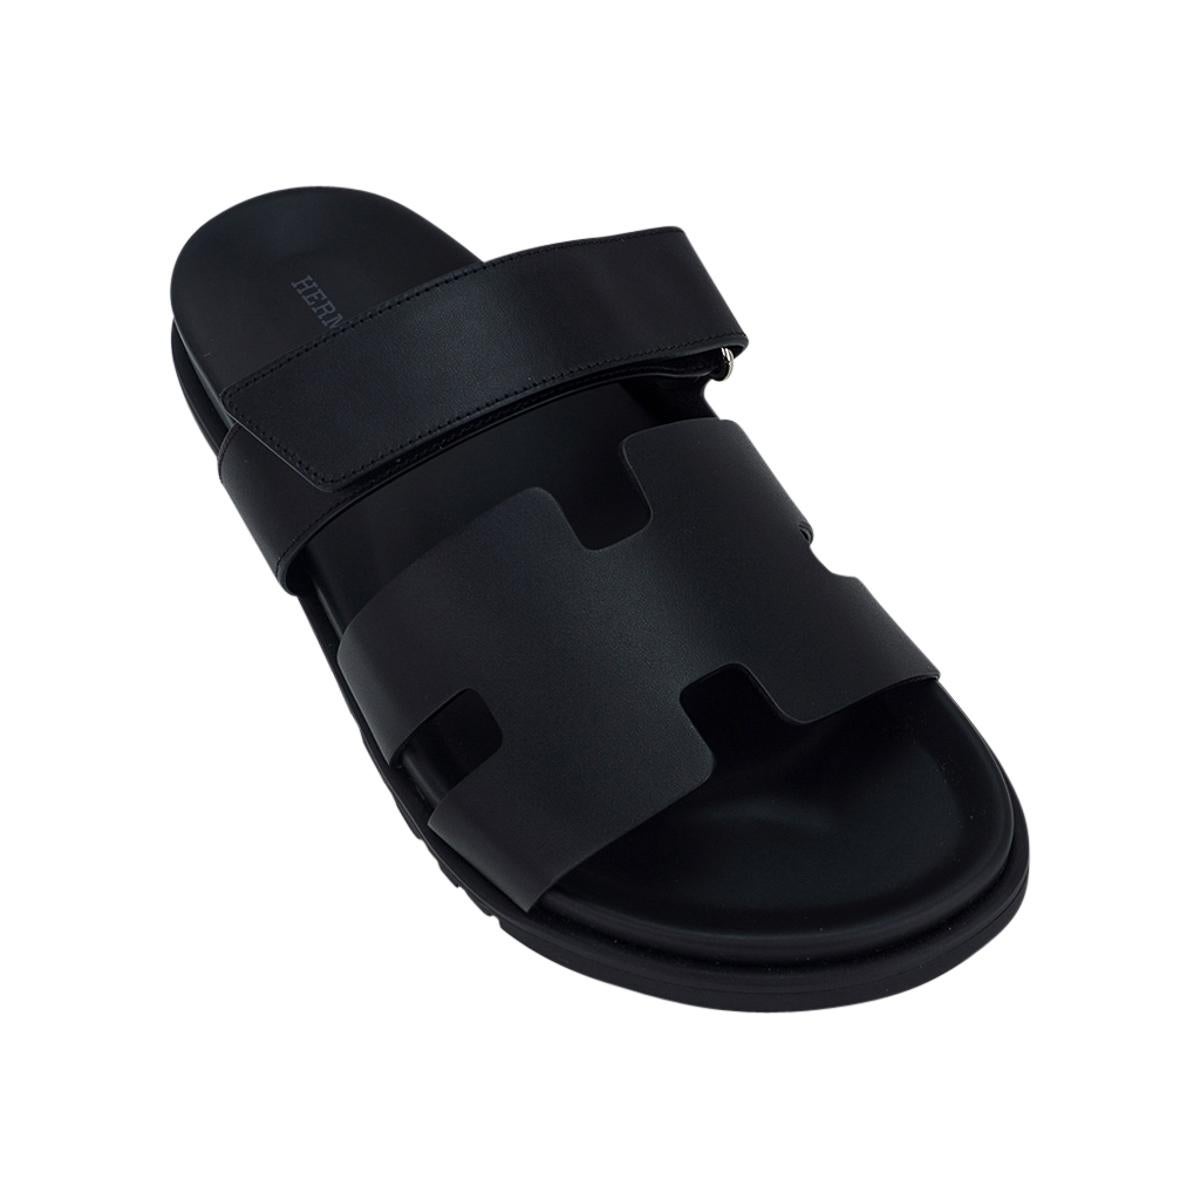 Mightychic offers a pair of limited edition Hermes Men's Chypre Sandal featured in Noir.
Black calfskin with black anatomical insole and H embossed Black rubber sole.
Strap across foot is adjustable with velcro closure.
Comes with sleepers.
NEW or